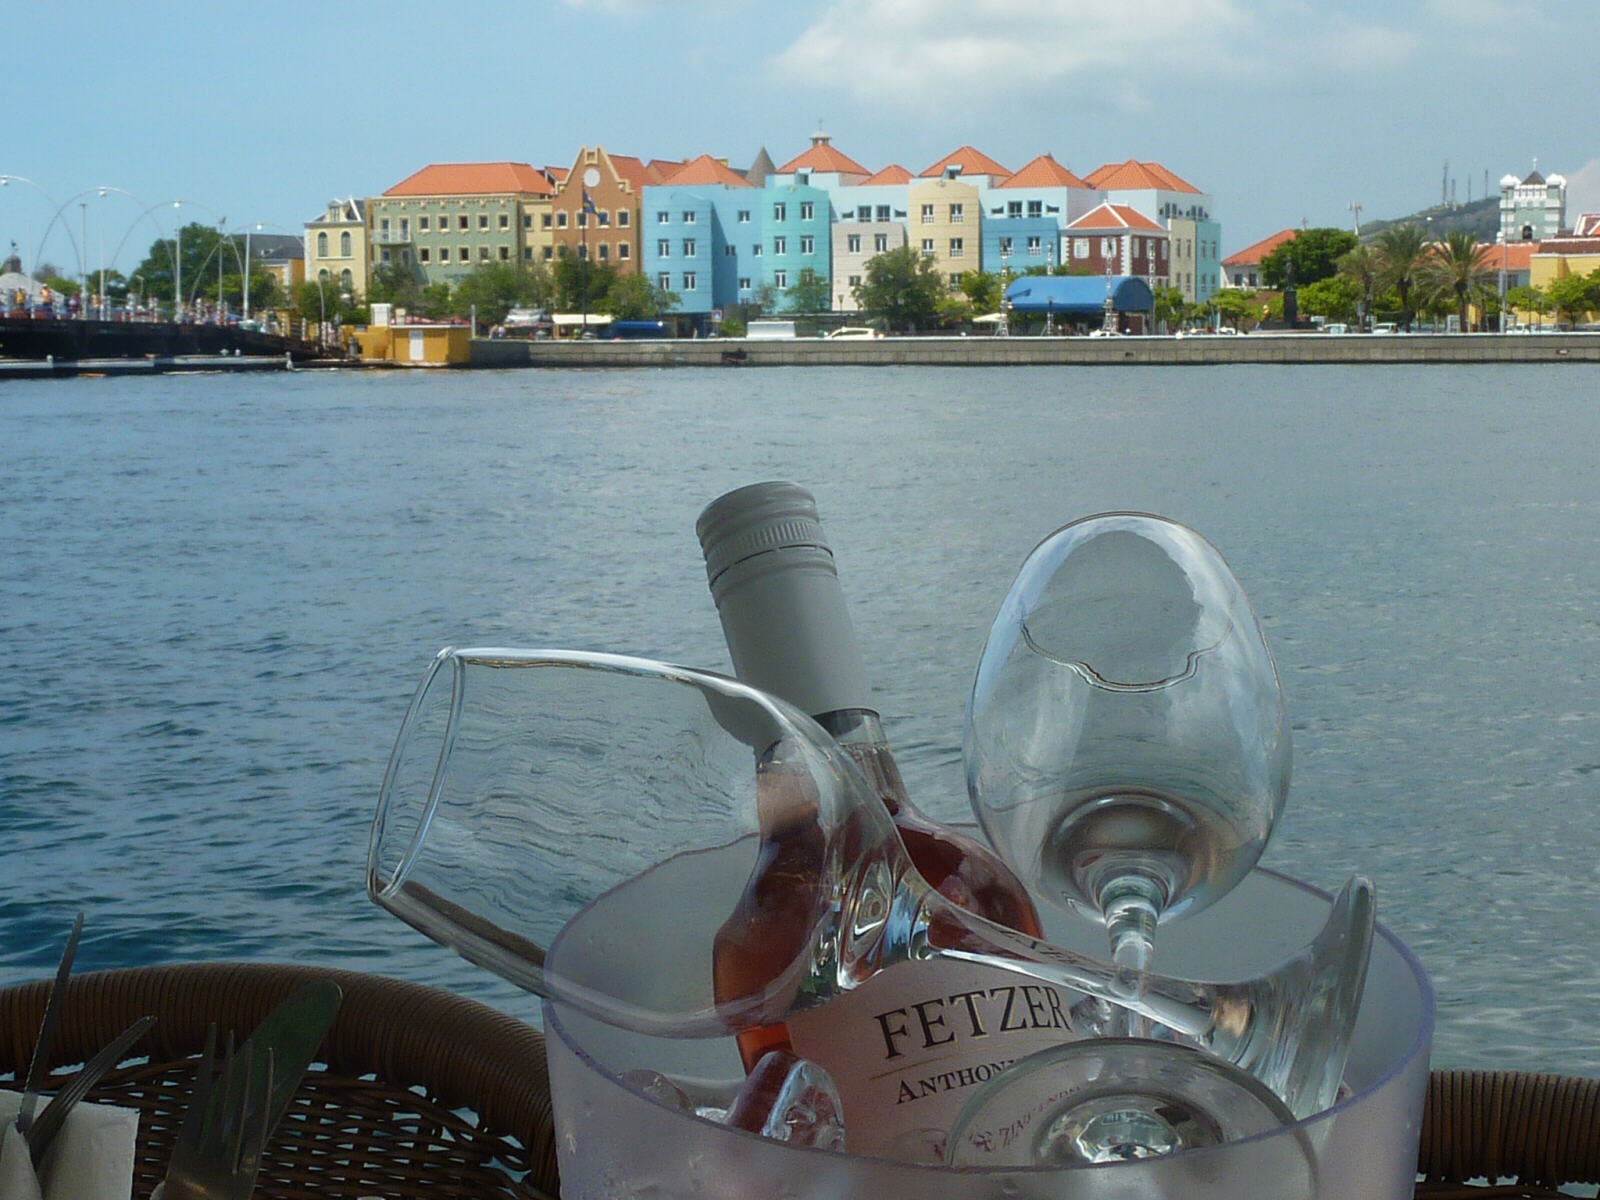 Lunch on the waterfront at Willemstad, Curacao